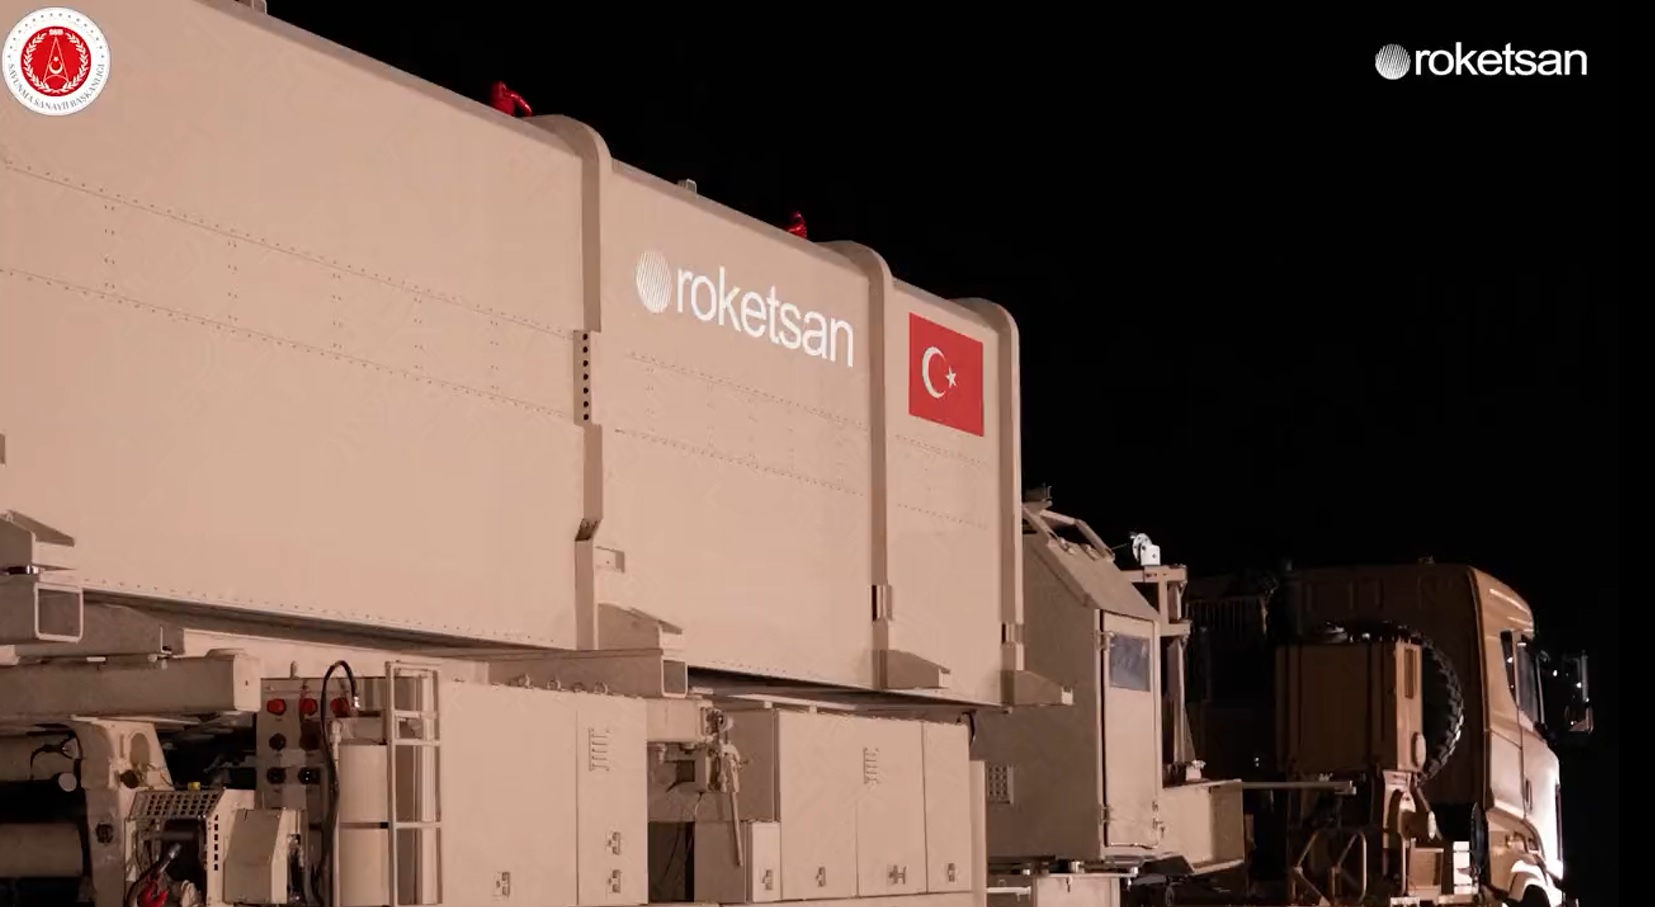 Roketsan unveils CENK, Turkey's first medium-range ballistic missile that can hit targets up to 1,000km away